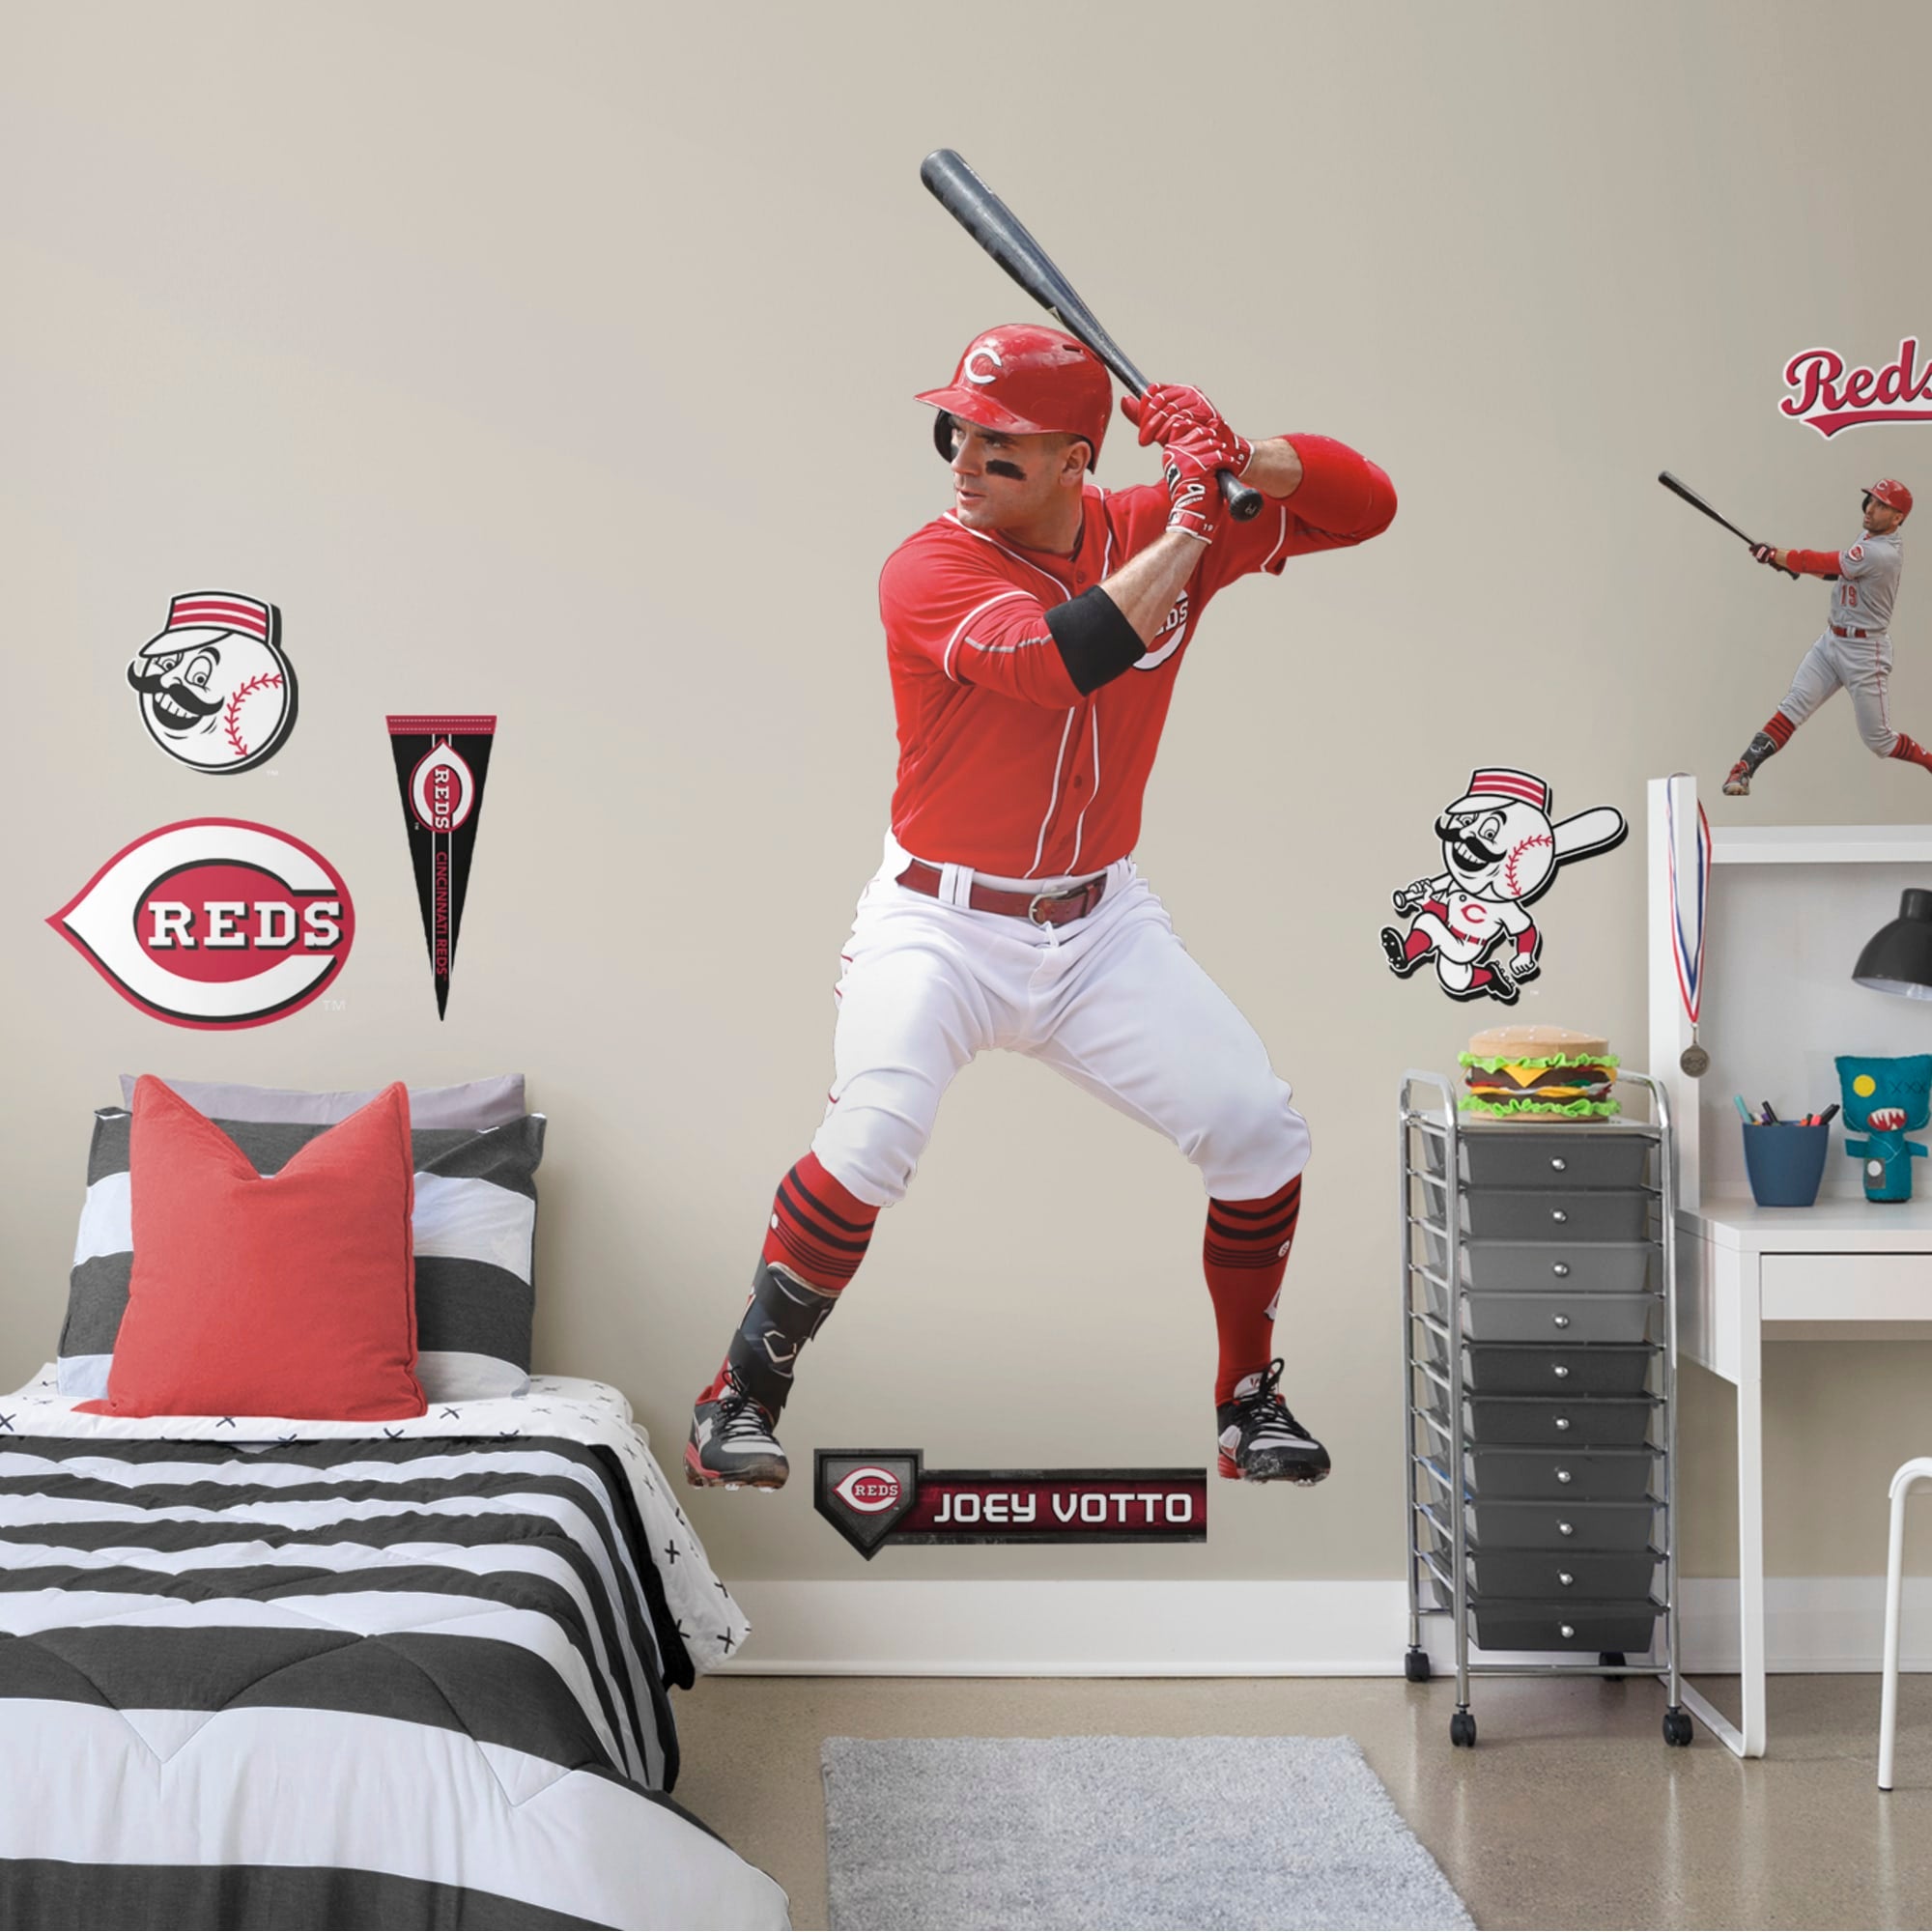 Joey Votto - Officially Licensed MLB Removable Wall Decal